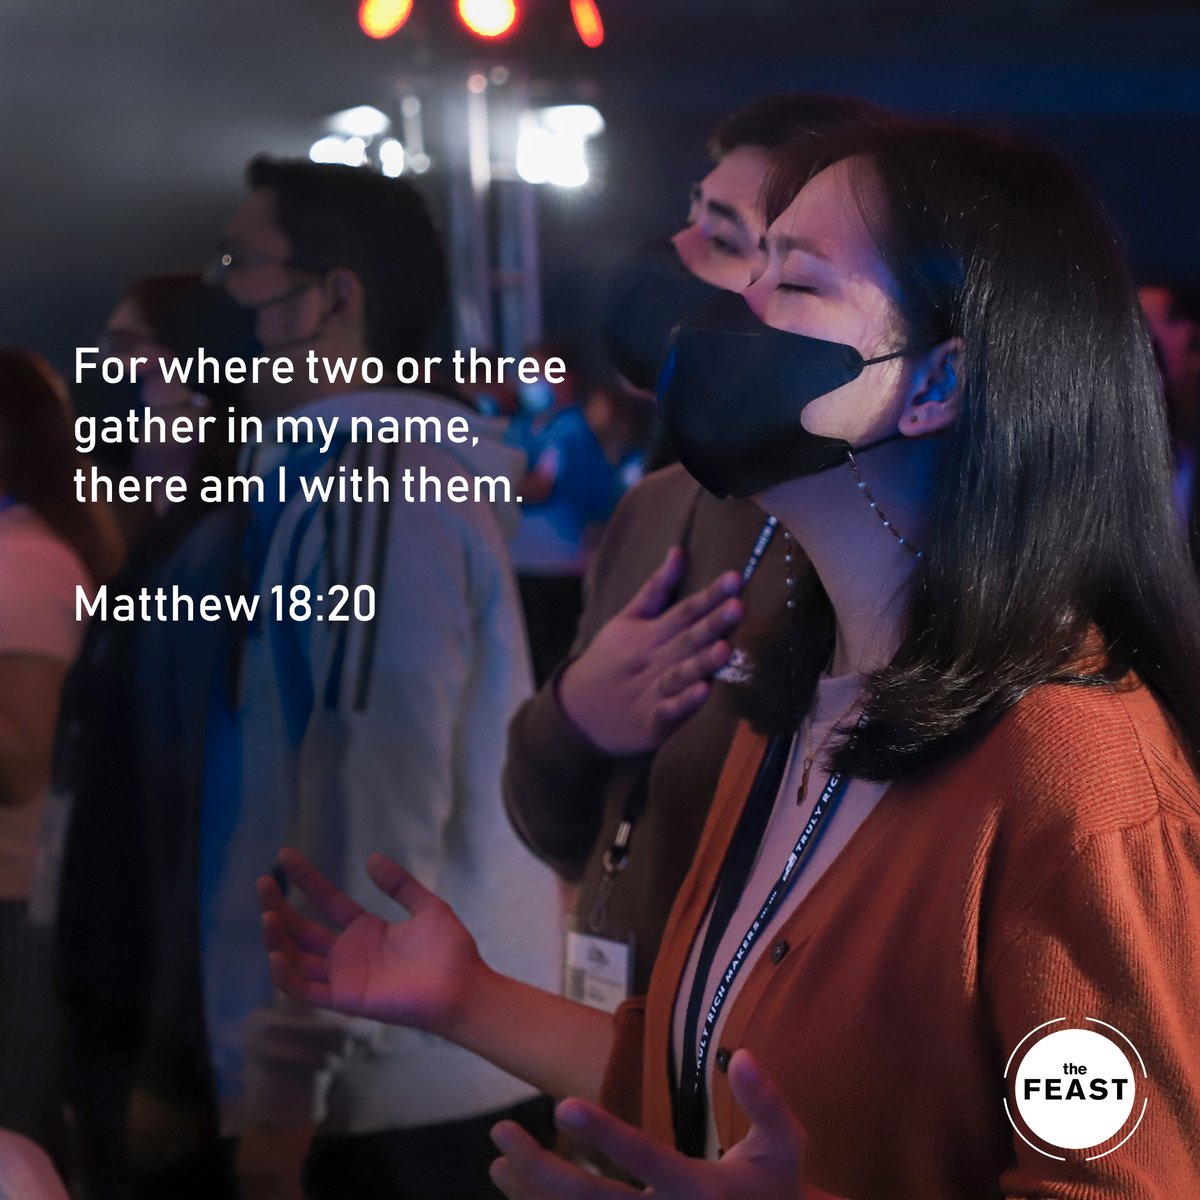 Are you looking for a spiritual family? There may be a Feast near you. Visit feast.ph/locations/ #TheFeast #Youareloved